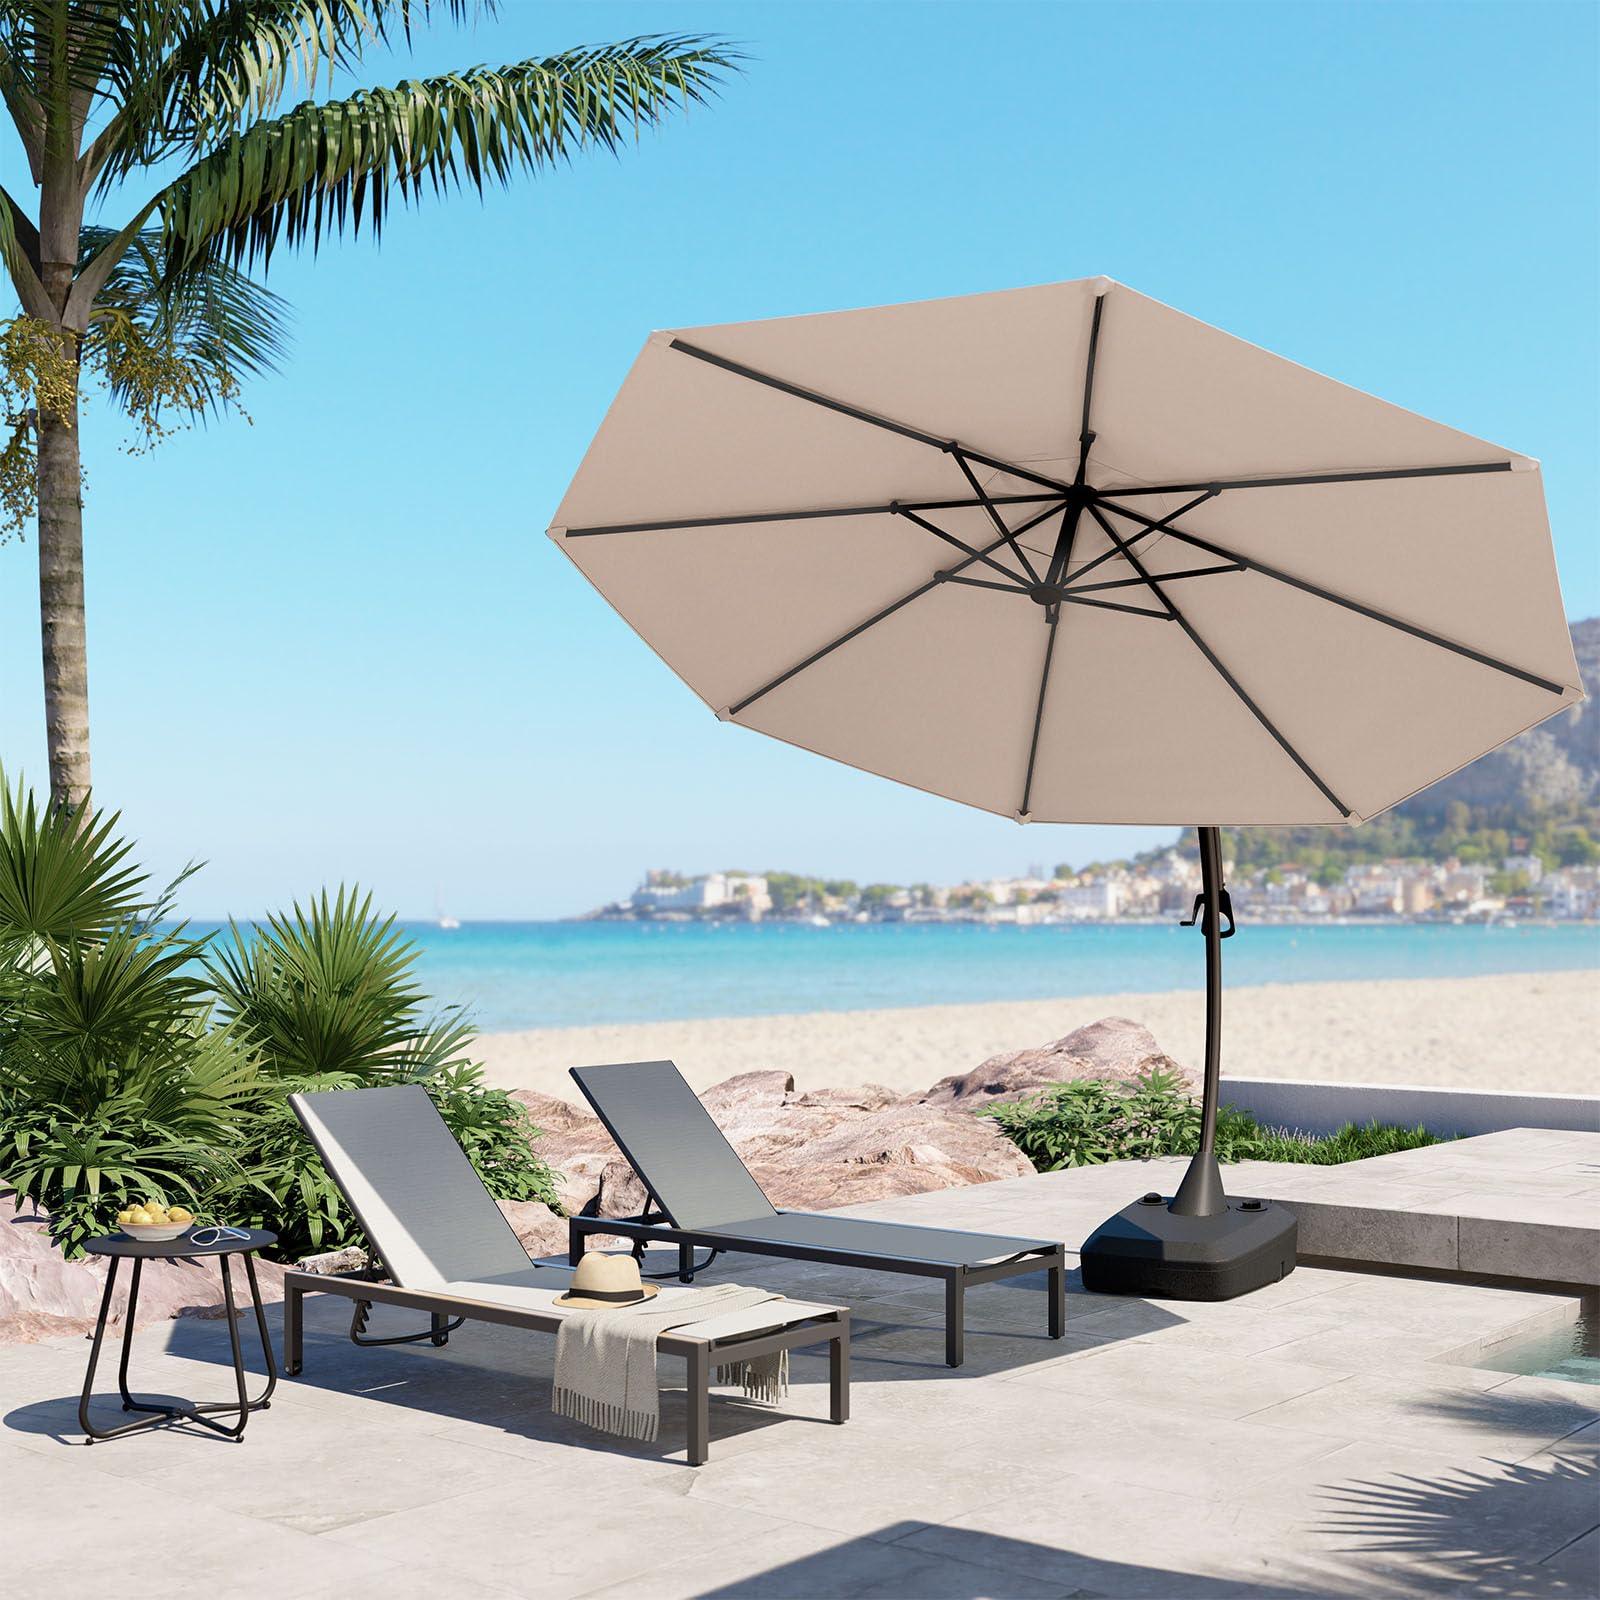 Grand patio Deluxe NAPOLI Patio Umbrella, Curvy Aluminum Cantilever Umbrella with Base, Round Large Offset Umbrellas for Garden Deck Pool (Champagne, 11 FT) - CookCave